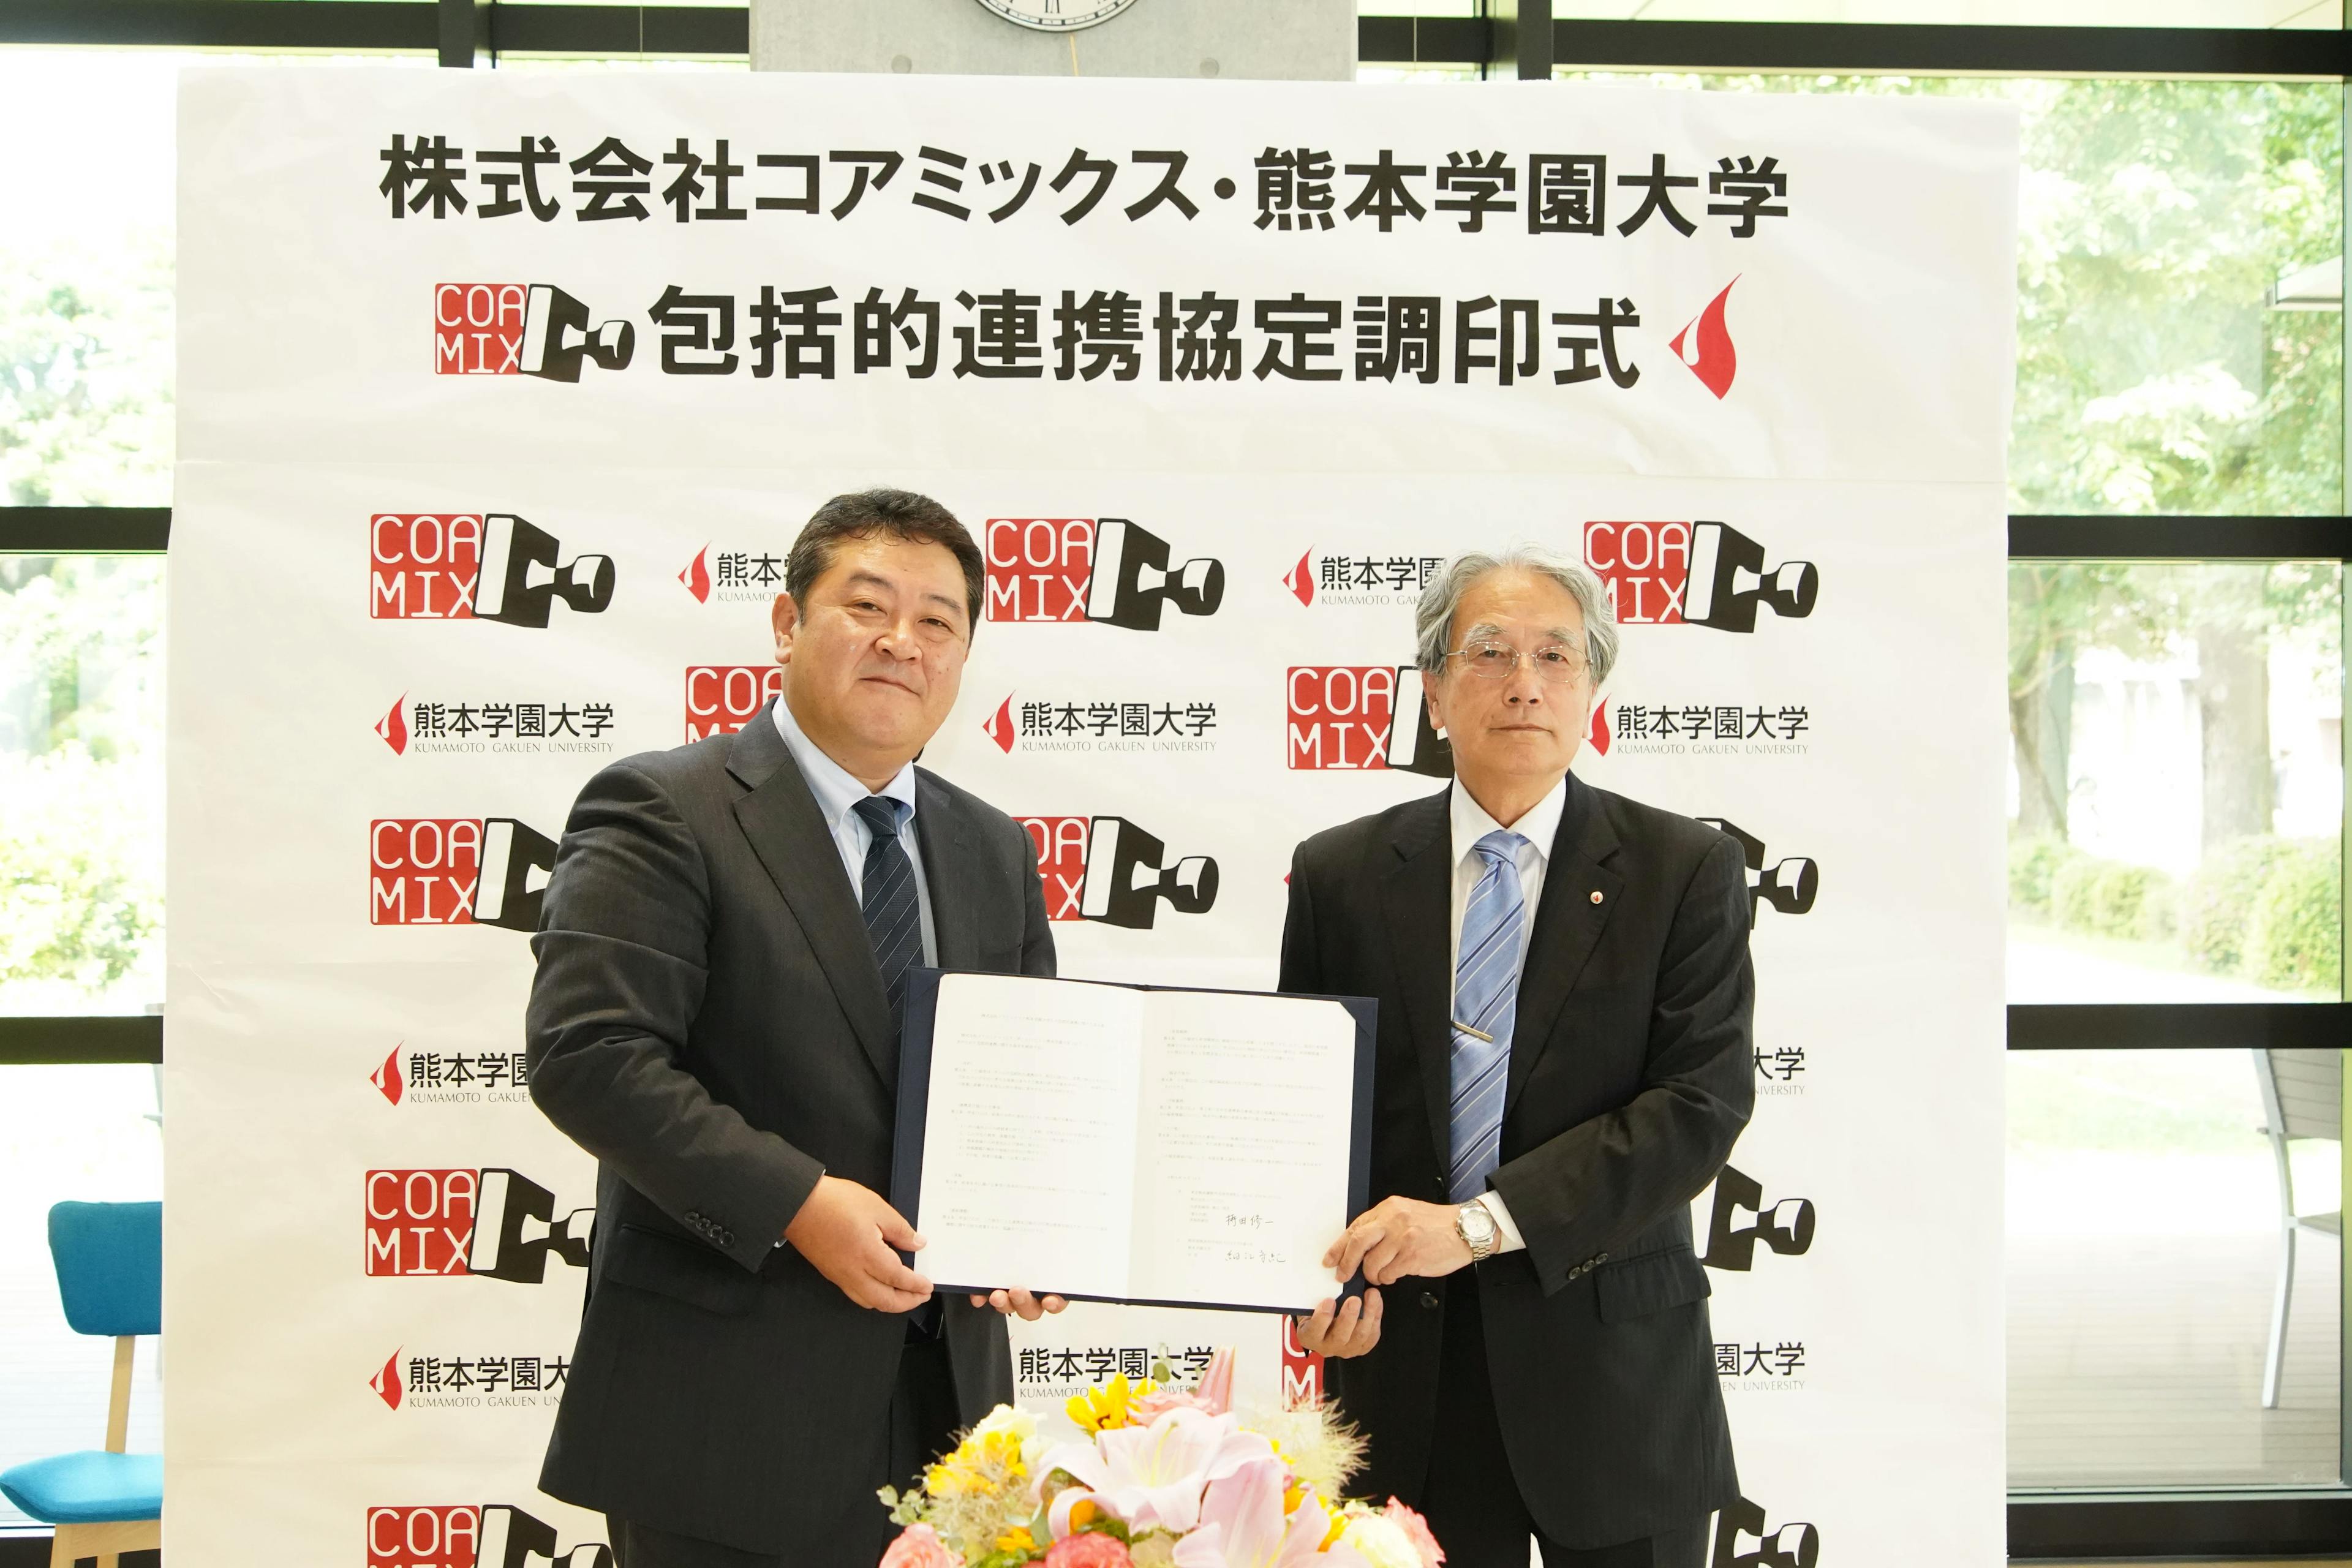 Conclusion of "Agreement on Comprehensive Collaboration" with Kumamoto Gakuen University